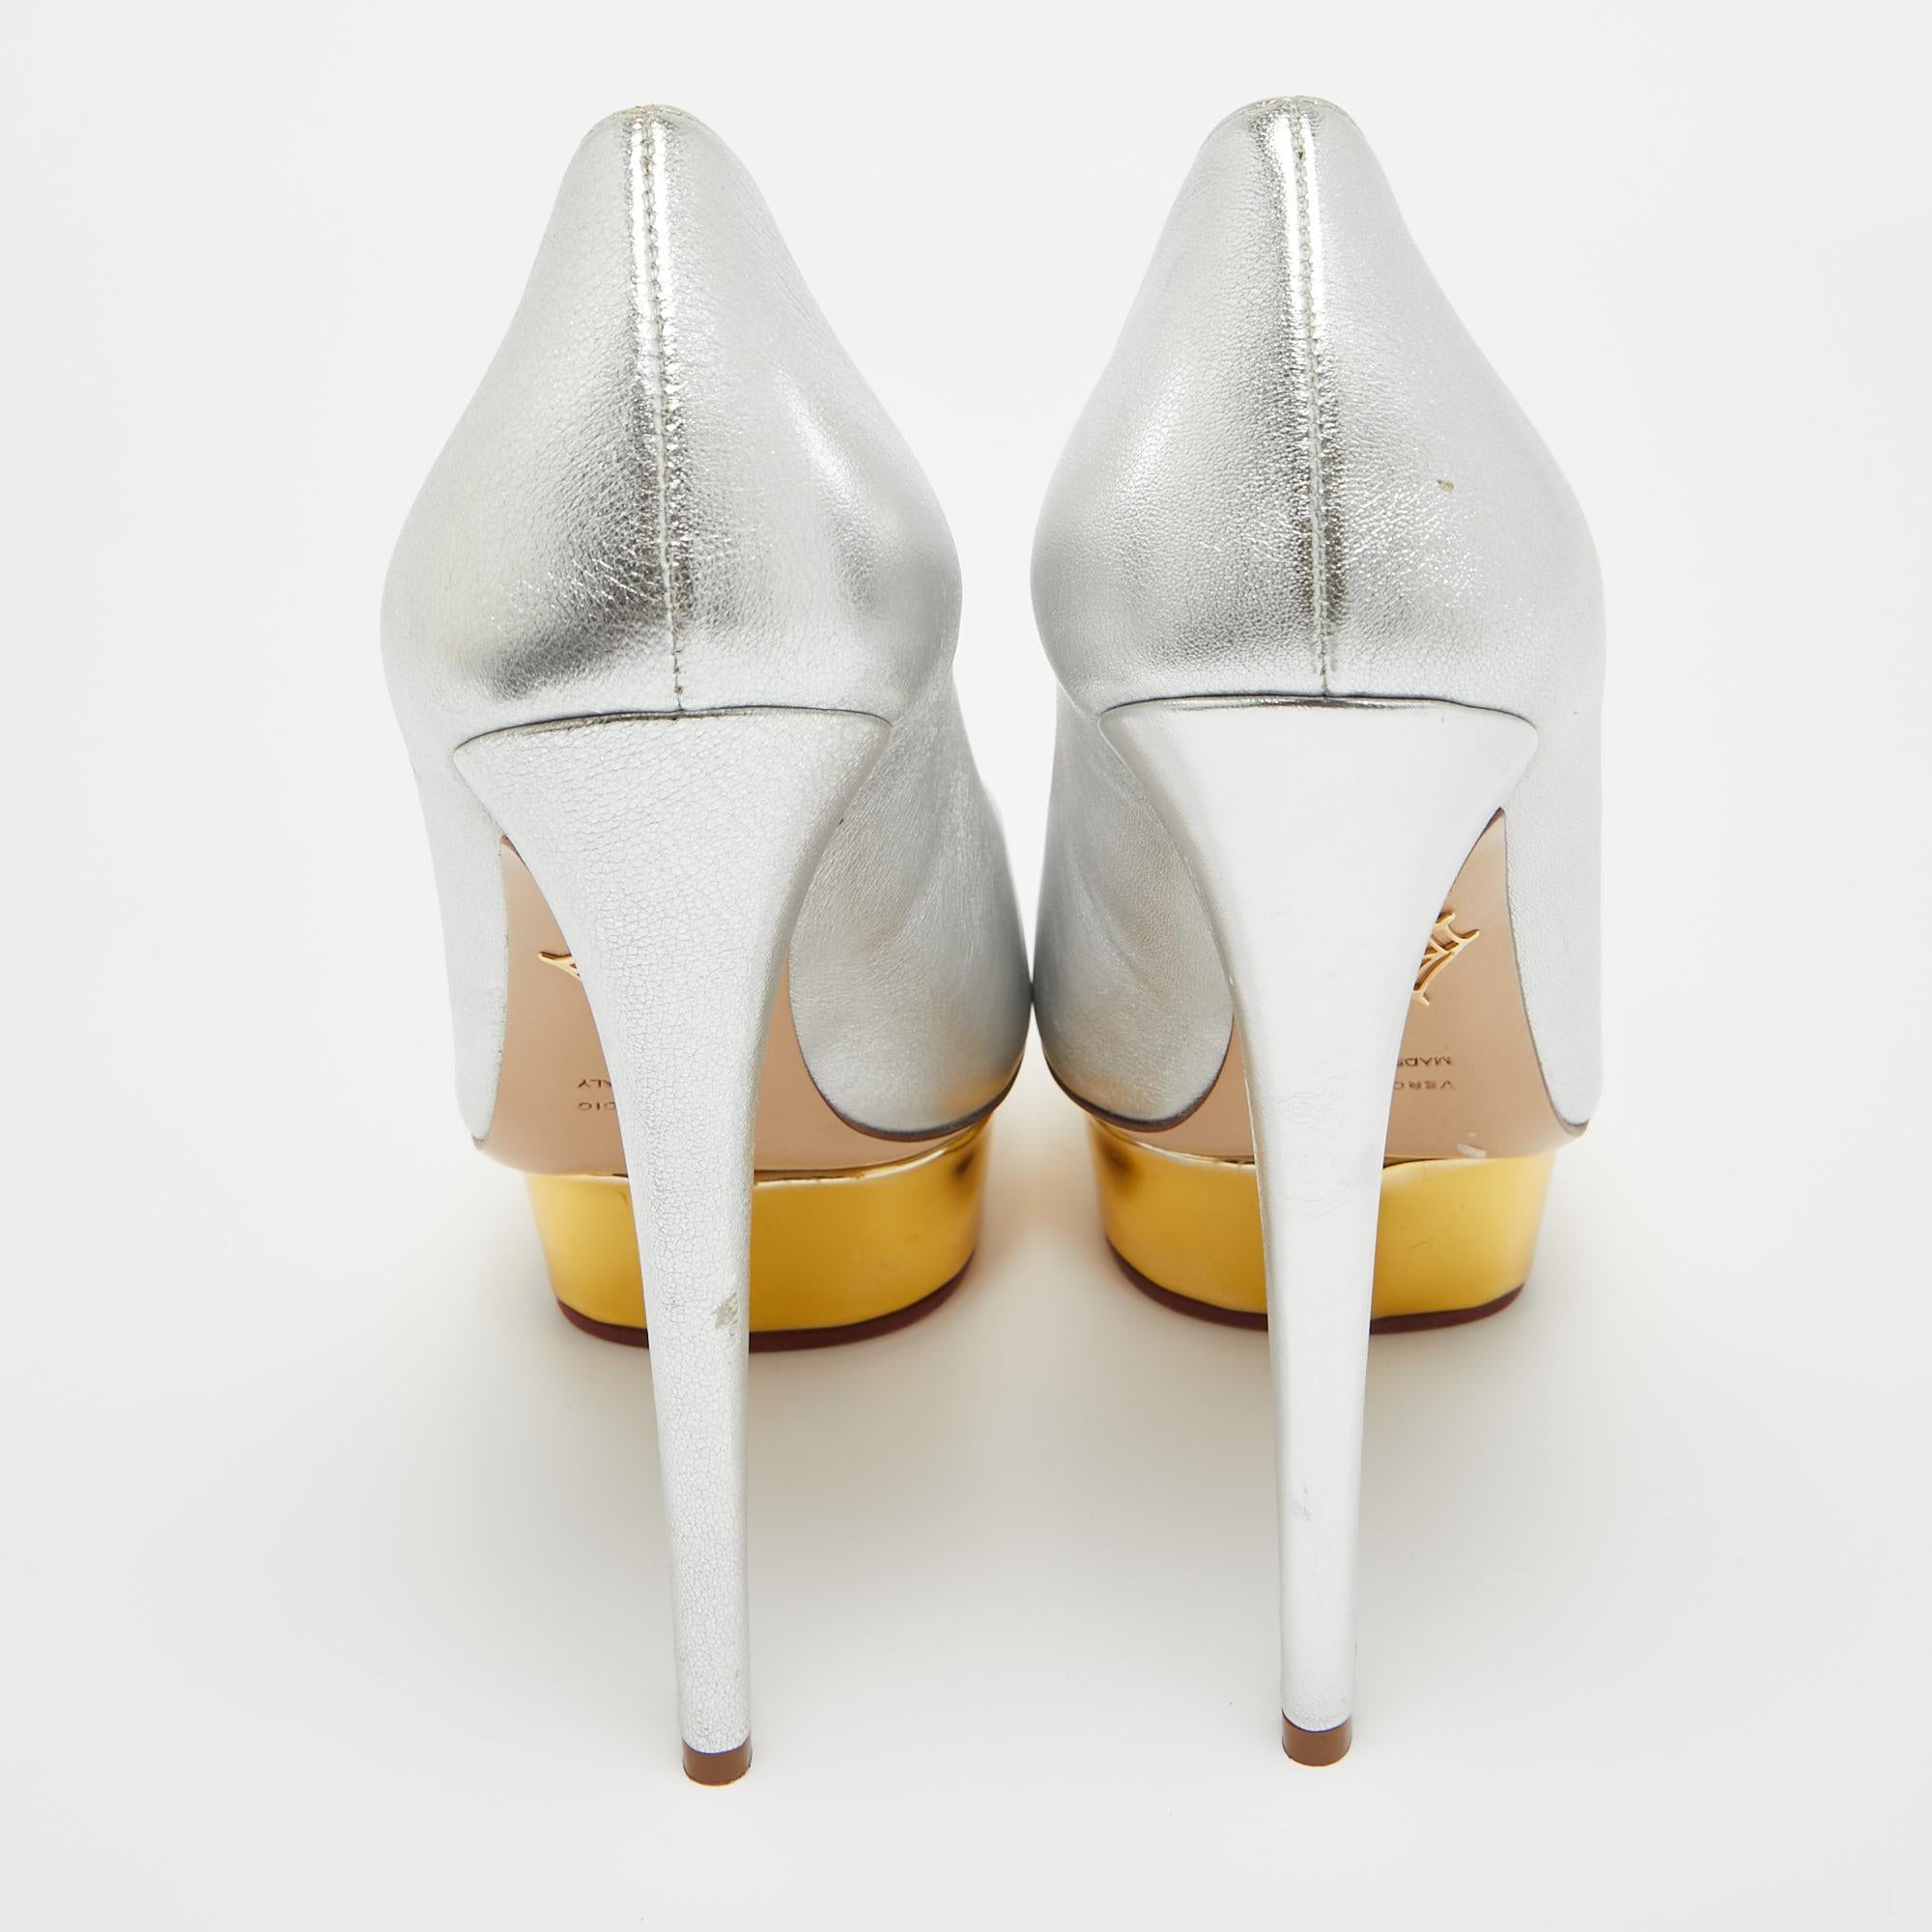 Charlotte Olympia Silver Leather Dolly Platform Pumps Size 40 For Sale 3